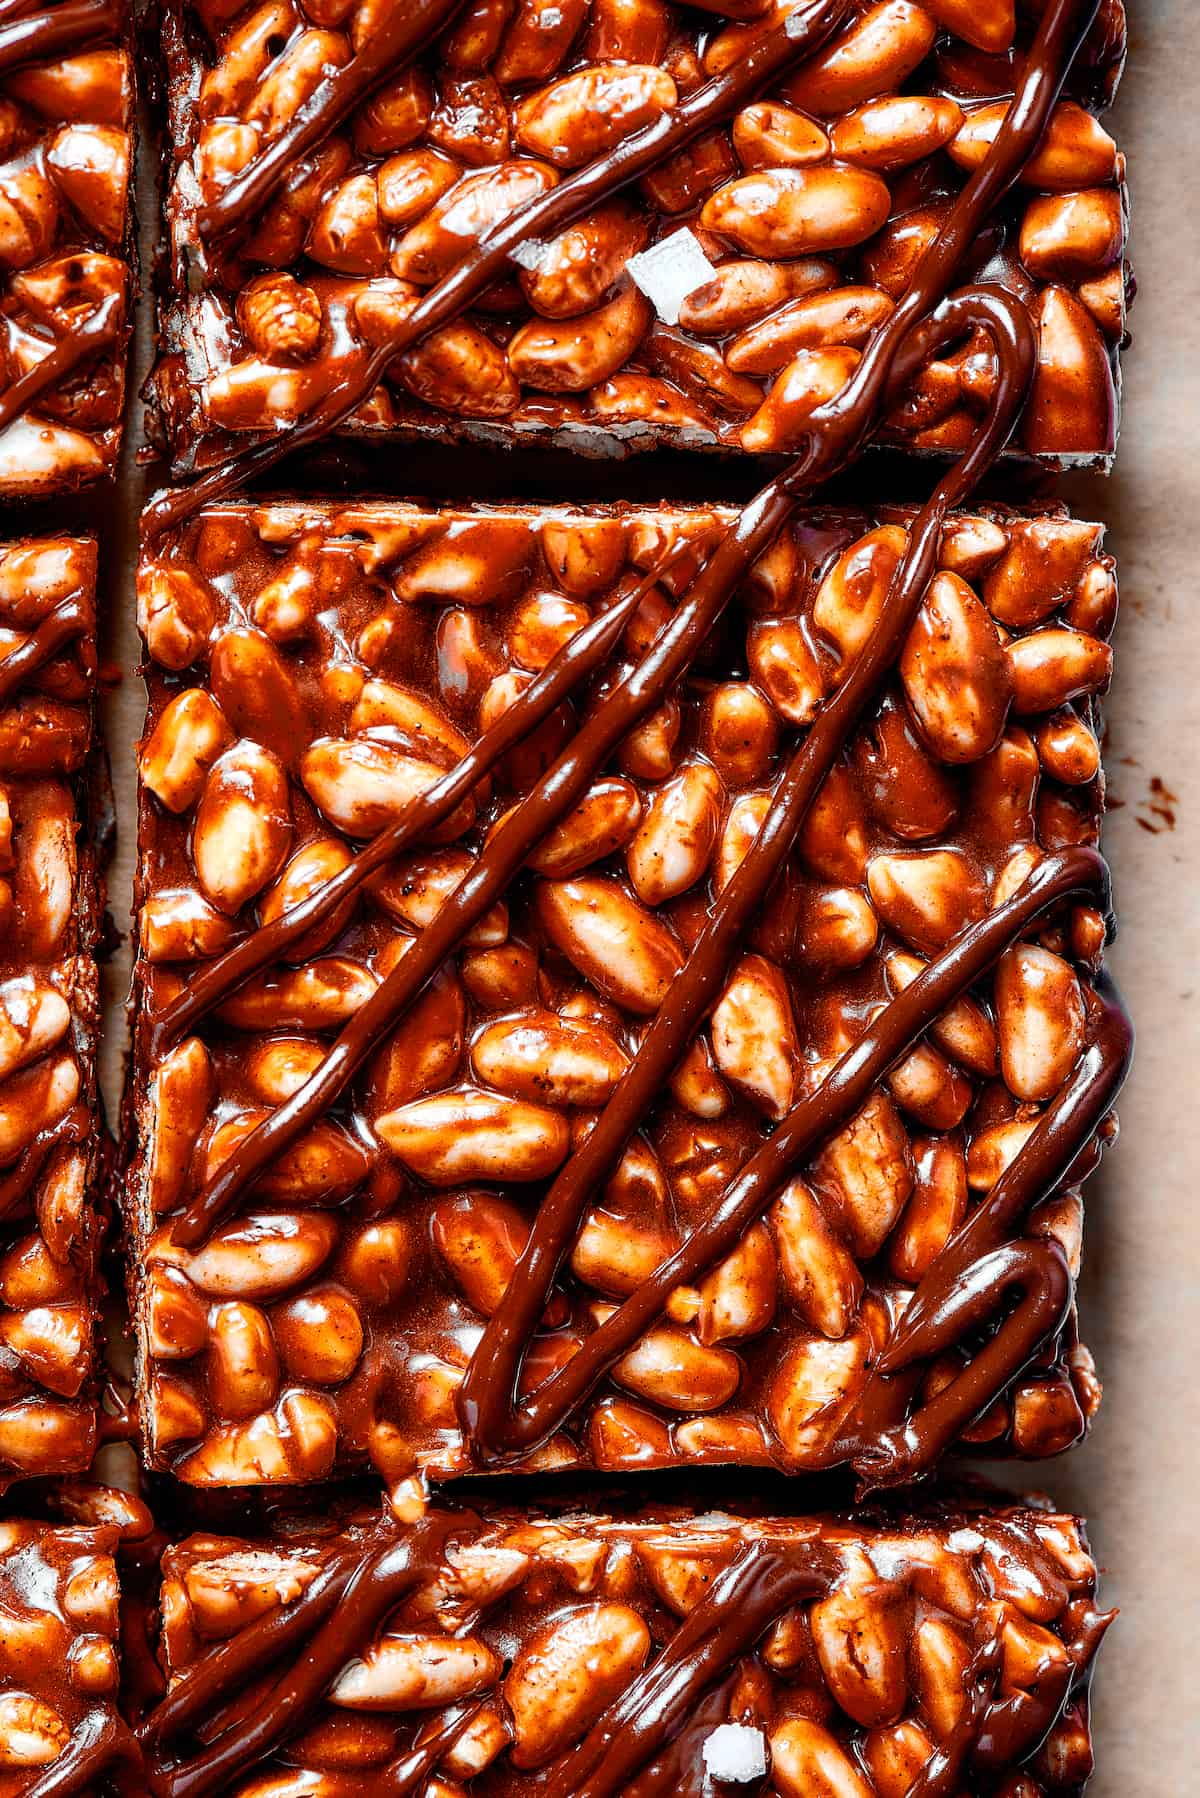 Squares of chocolate rice crispy bars with chocolate drizzled over the top.